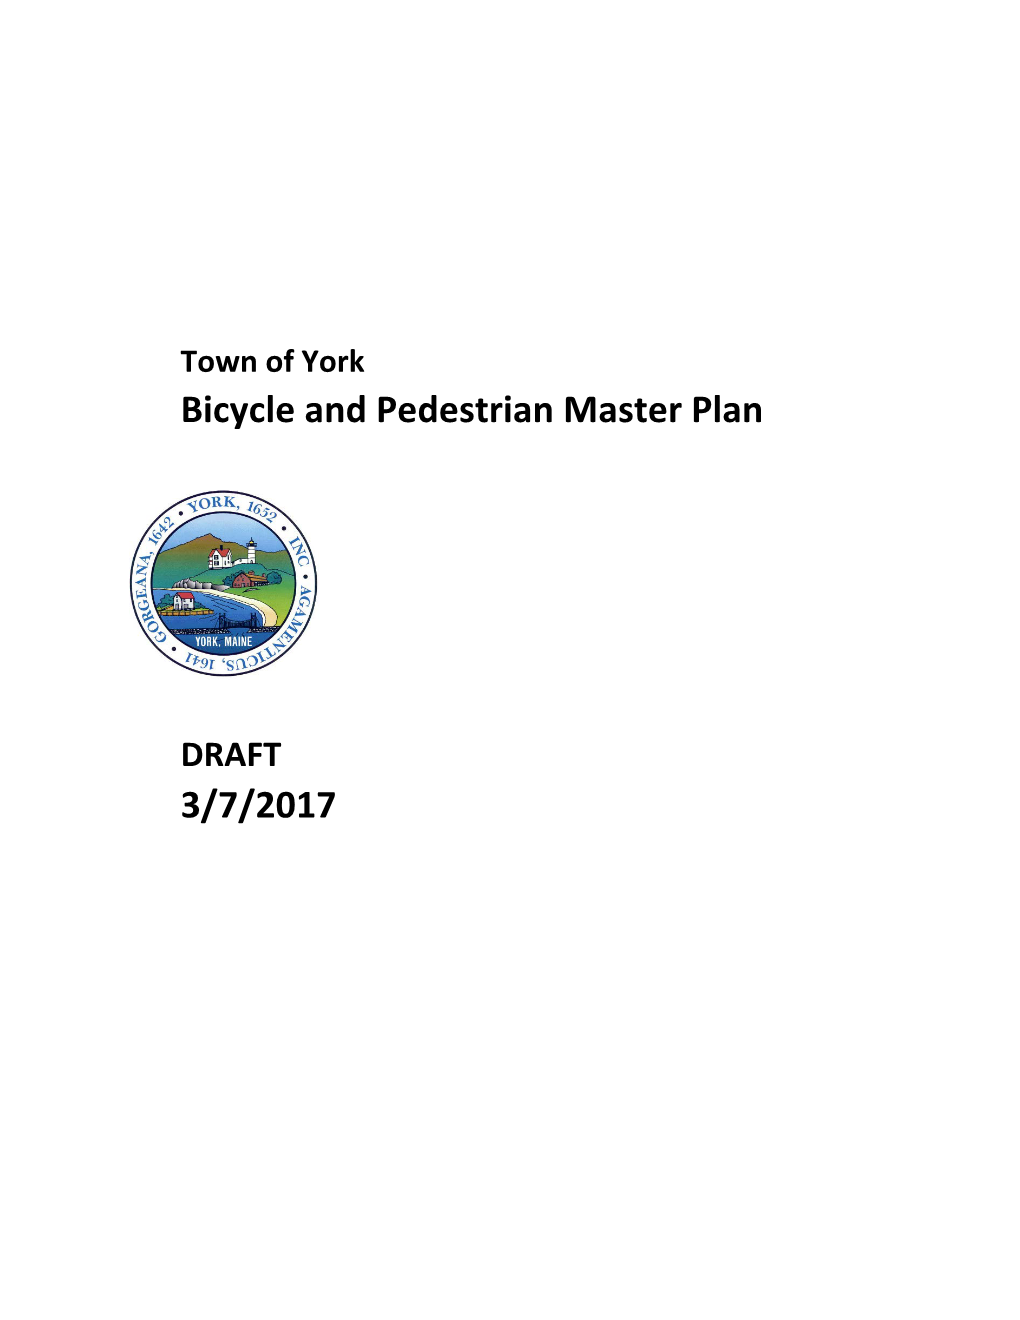 Bicycle and Pedestrian Master Plan 3/7/2017